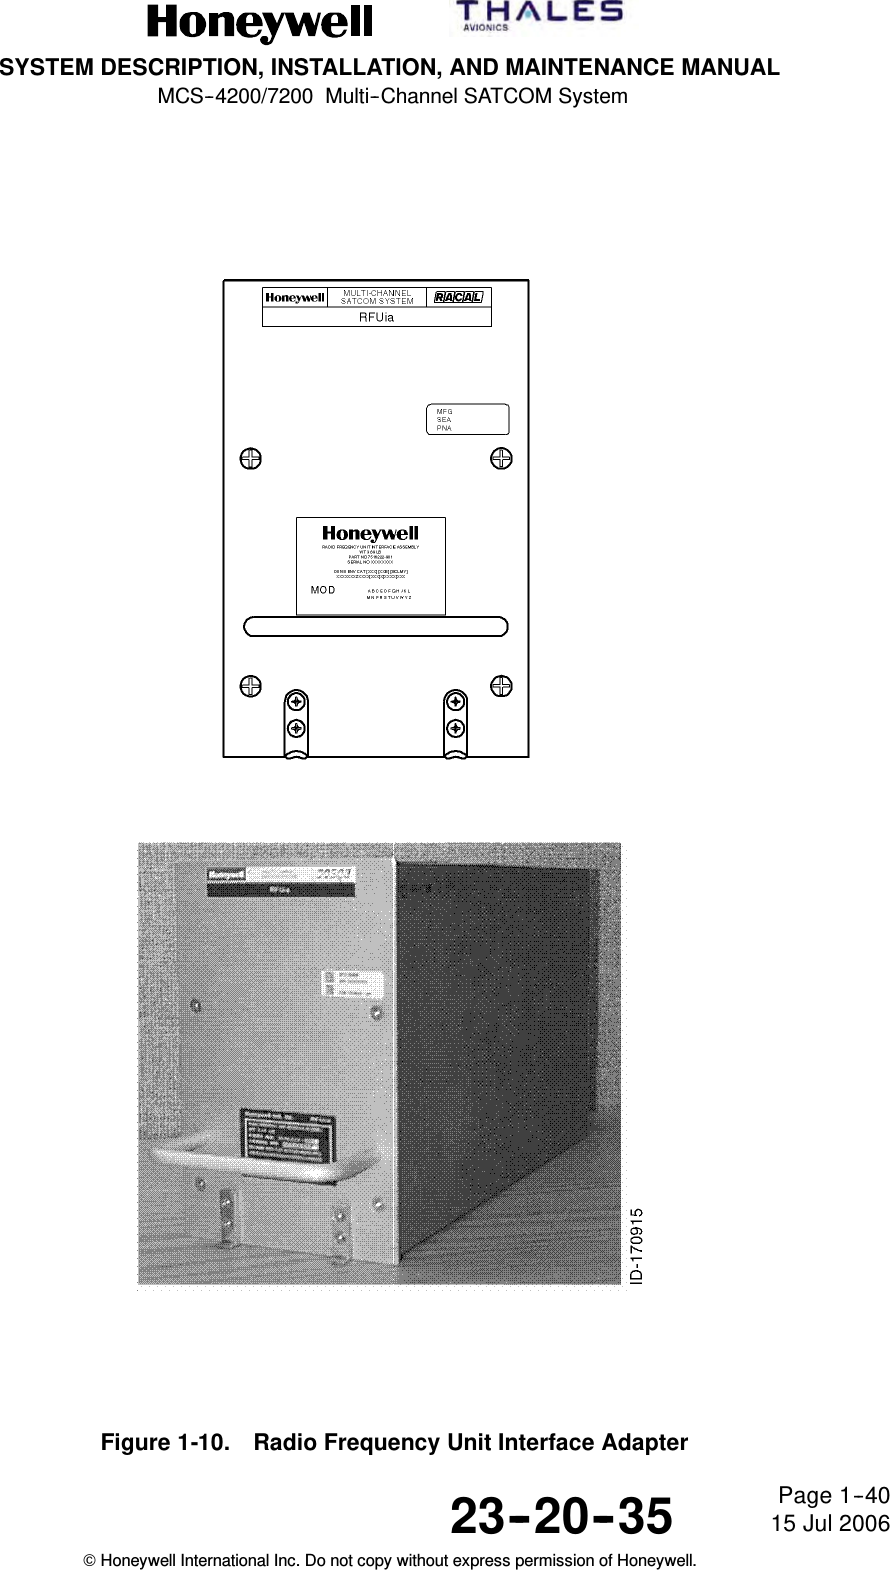 SYSTEM DESCRIPTION, INSTALLATION, AND MAINTENANCE MANUALMCS--4200/7200 Multi--Channel SATCOM System23--20--35 15 Jul 2006Honeywell International Inc. Do not copy without express permission of Honeywell.Page 1--40Figure 1-10. Radio Frequency Unit Interface Adapter